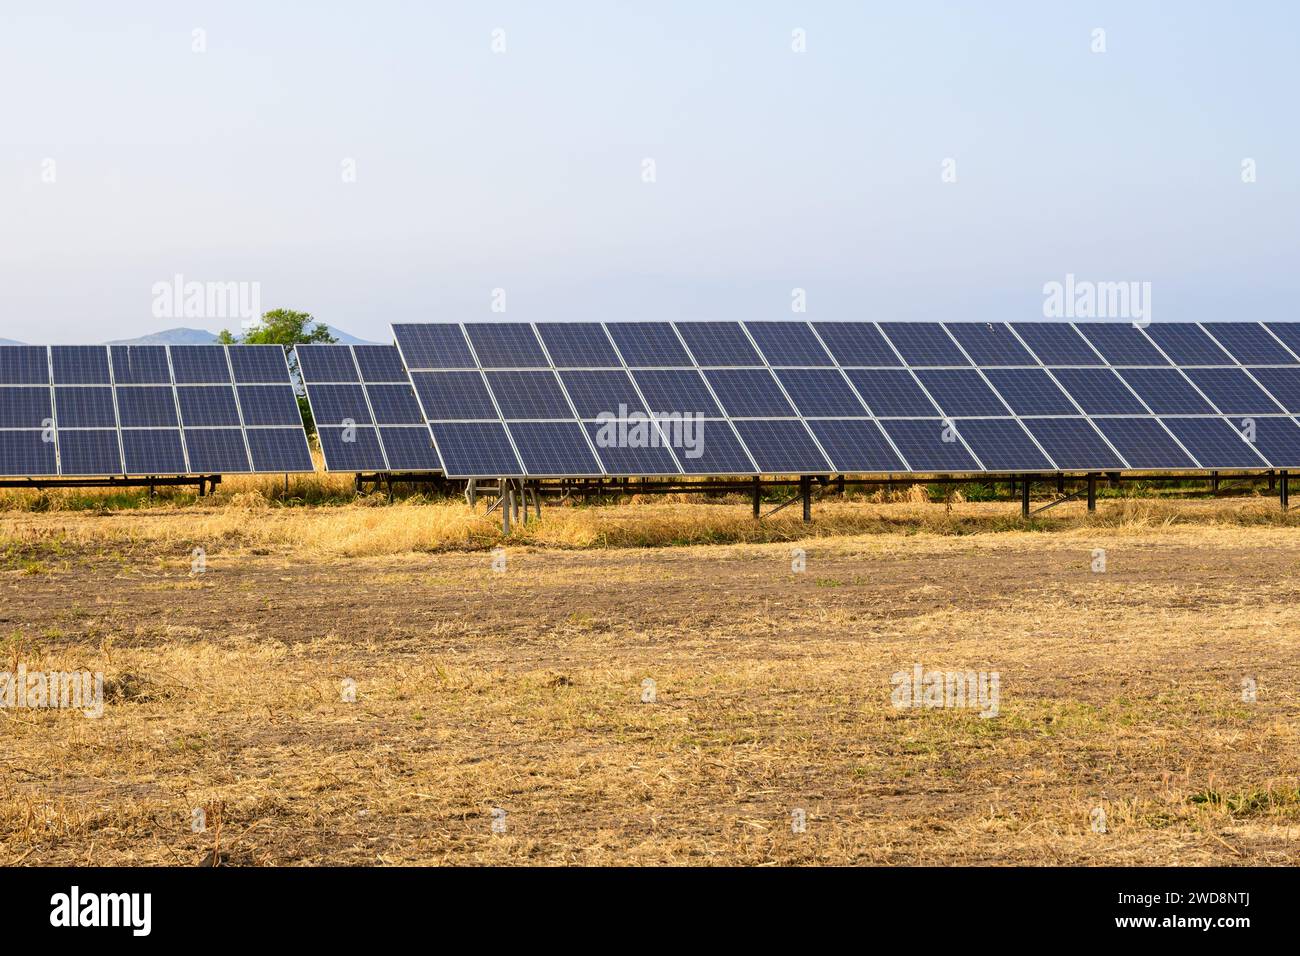 Solar power station with solar panels for producing electric power energy Stock Photo